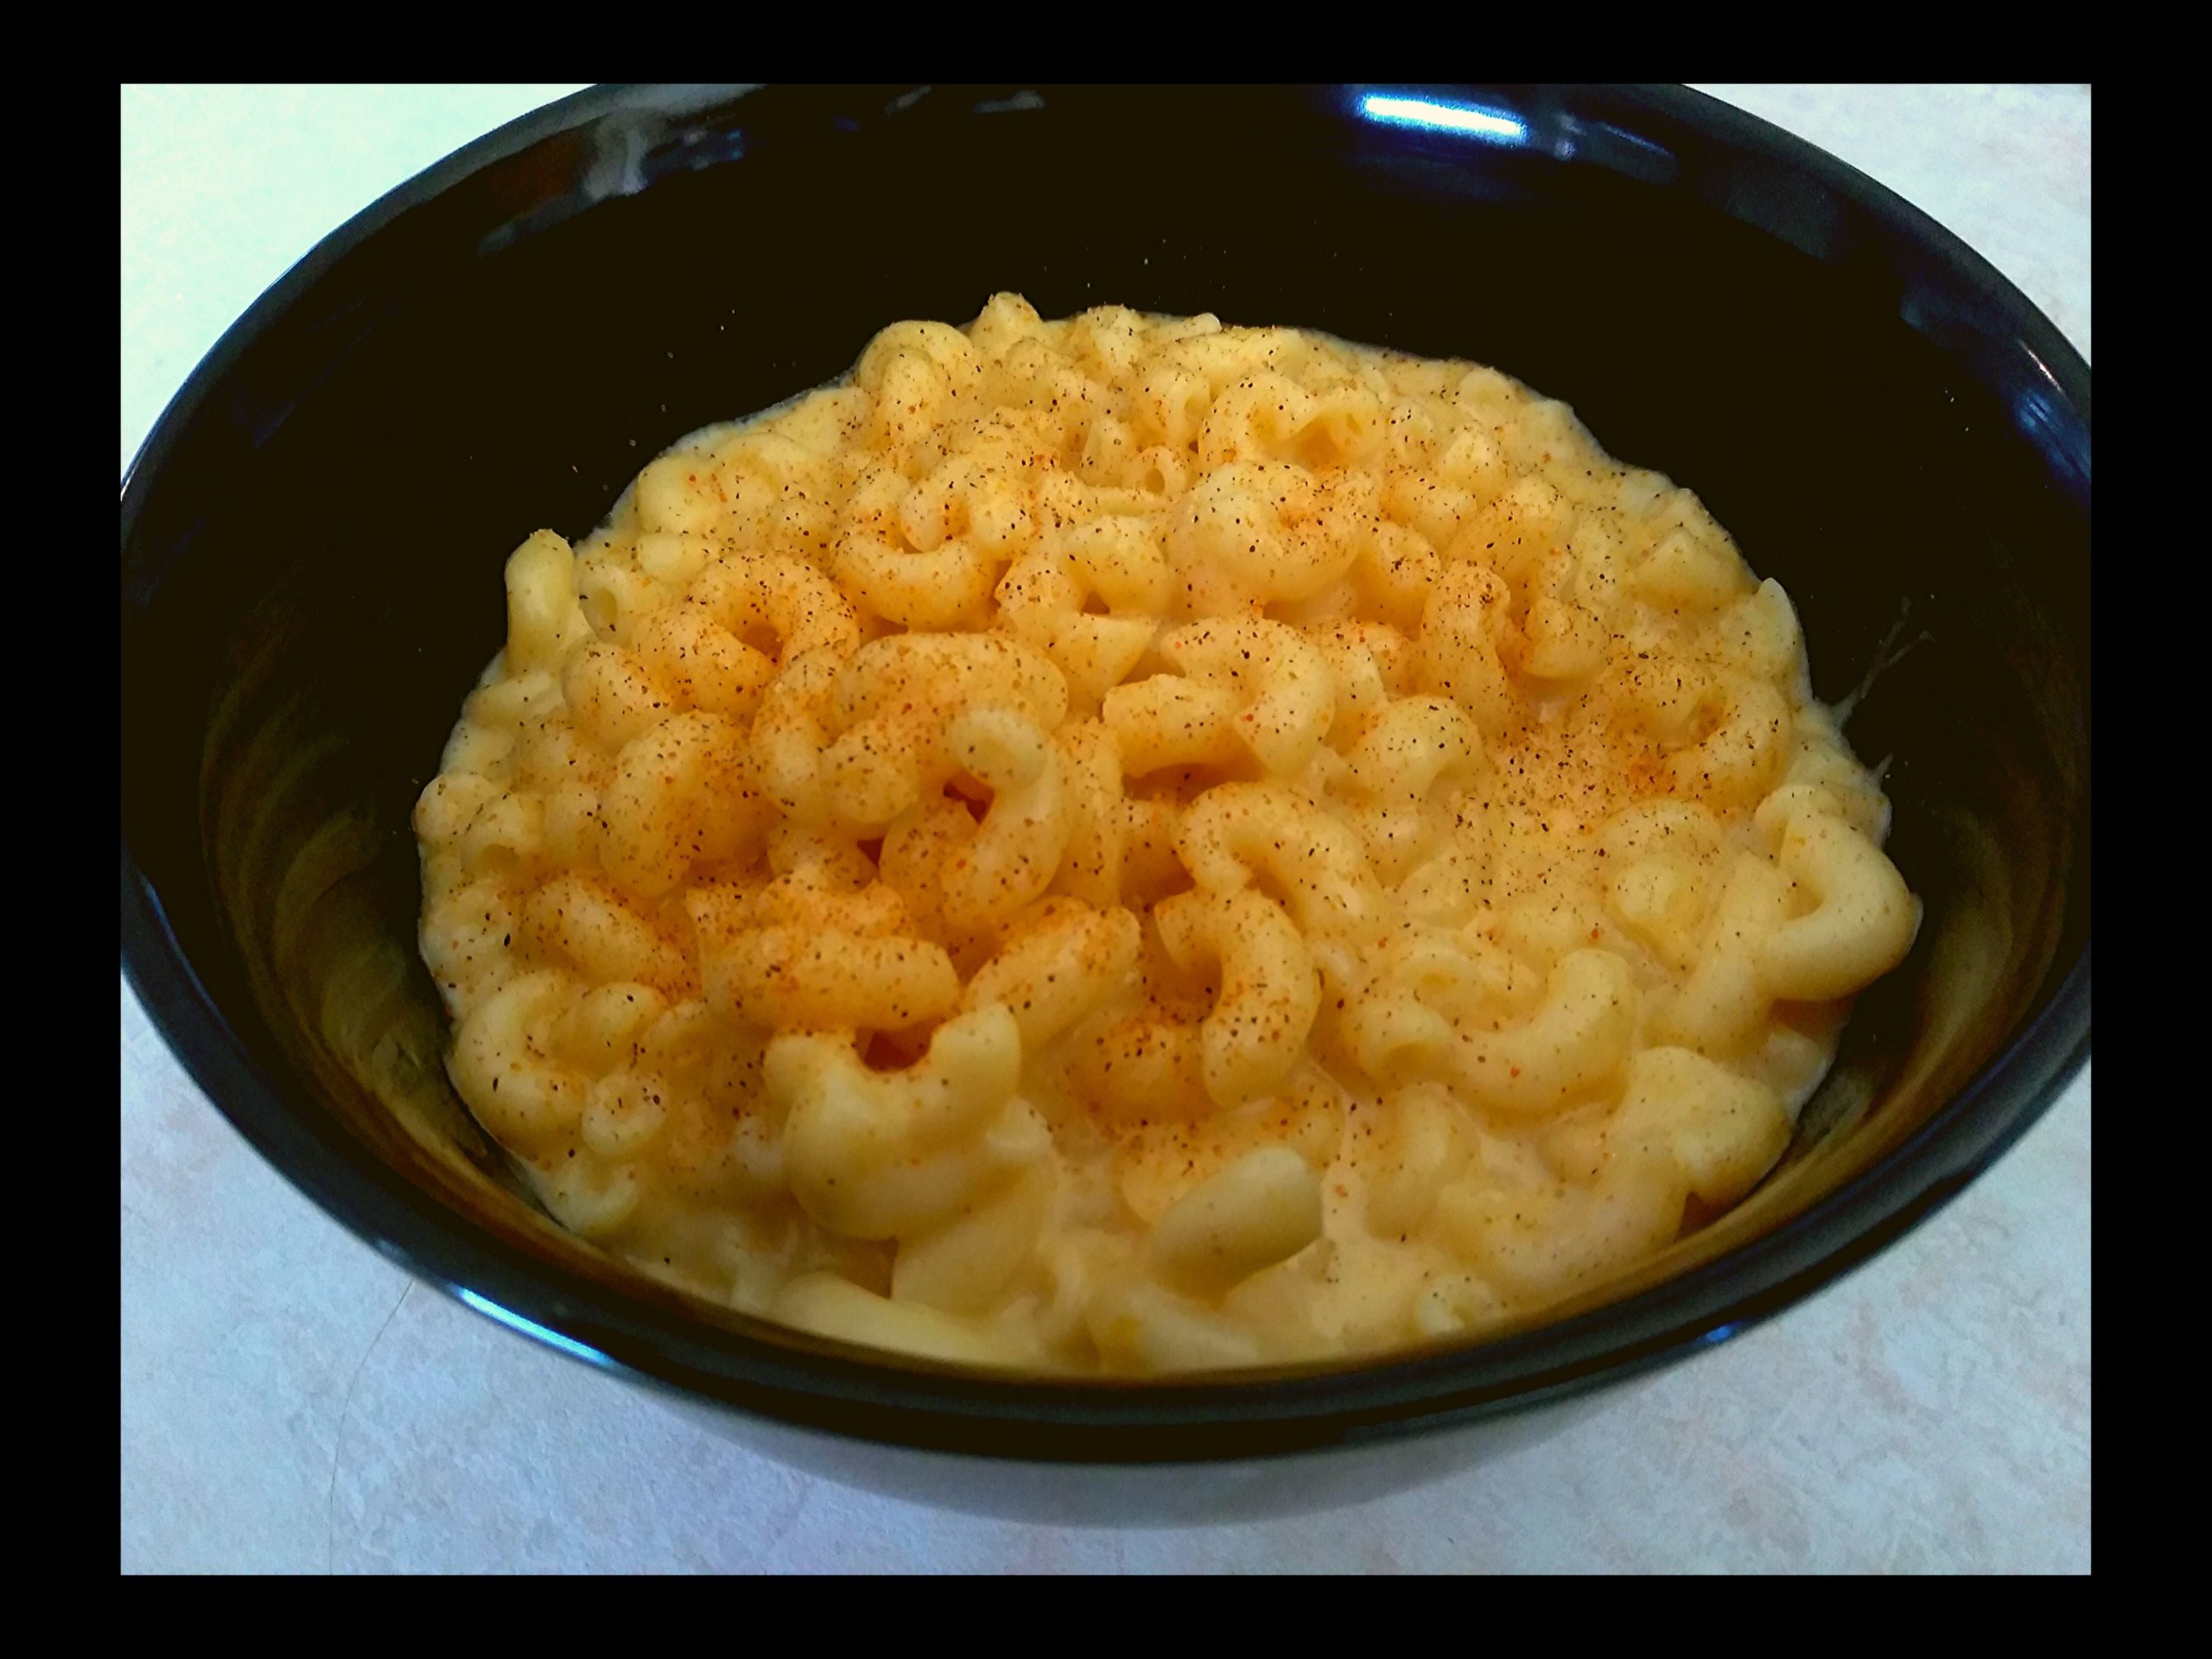 A black bowl filled with macaroni and cheese.